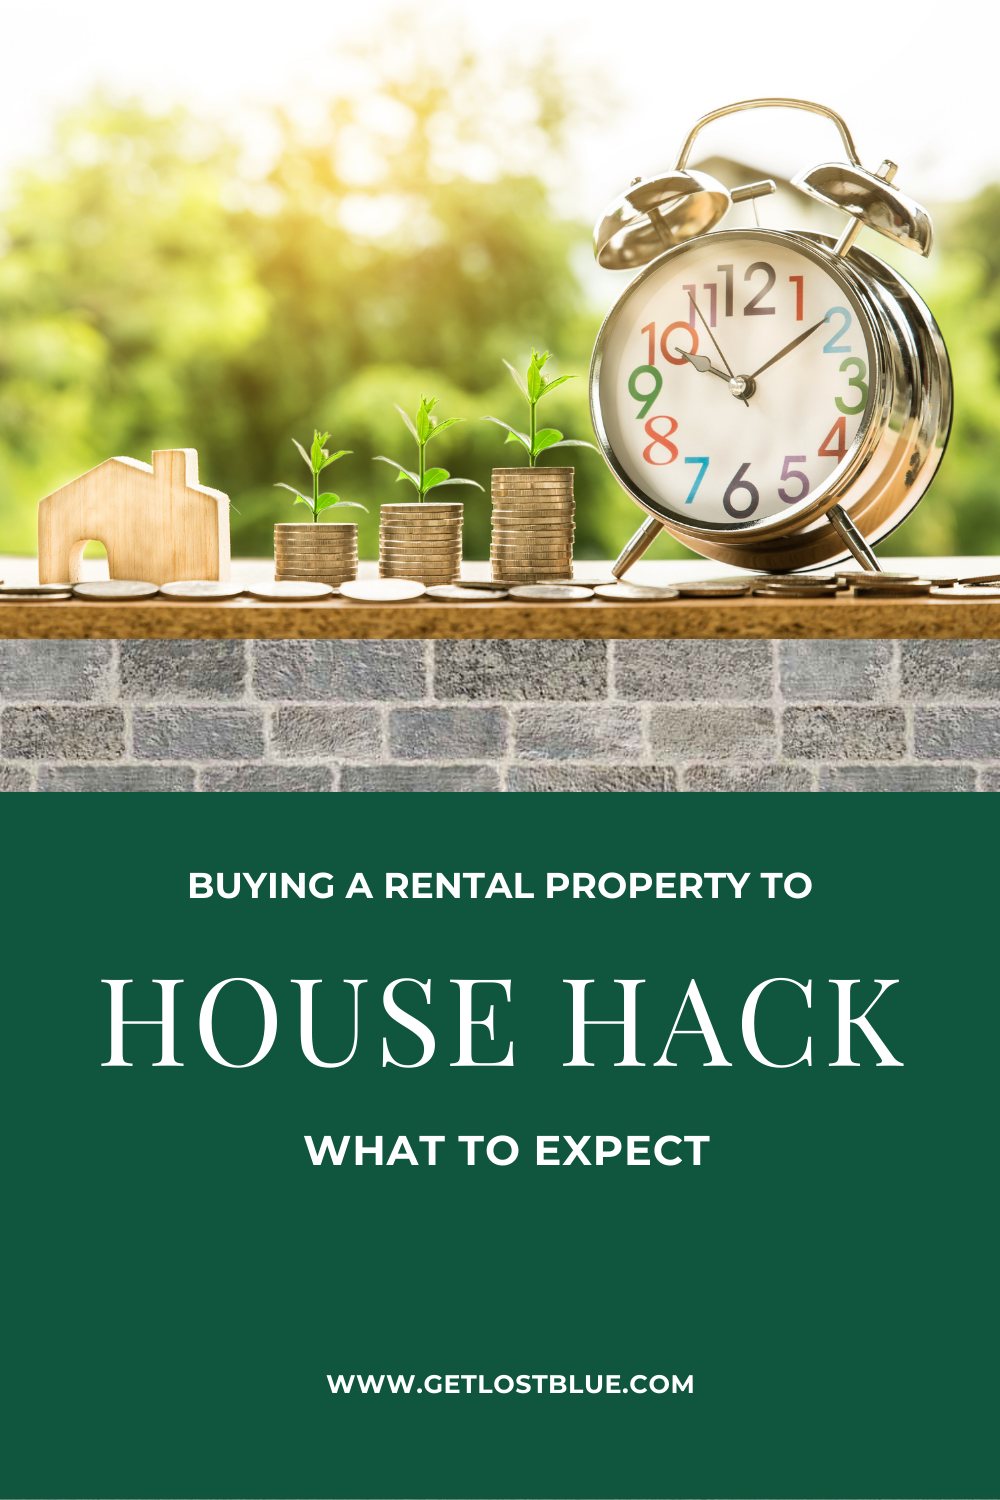 What to expect when purchasing property to House Hack